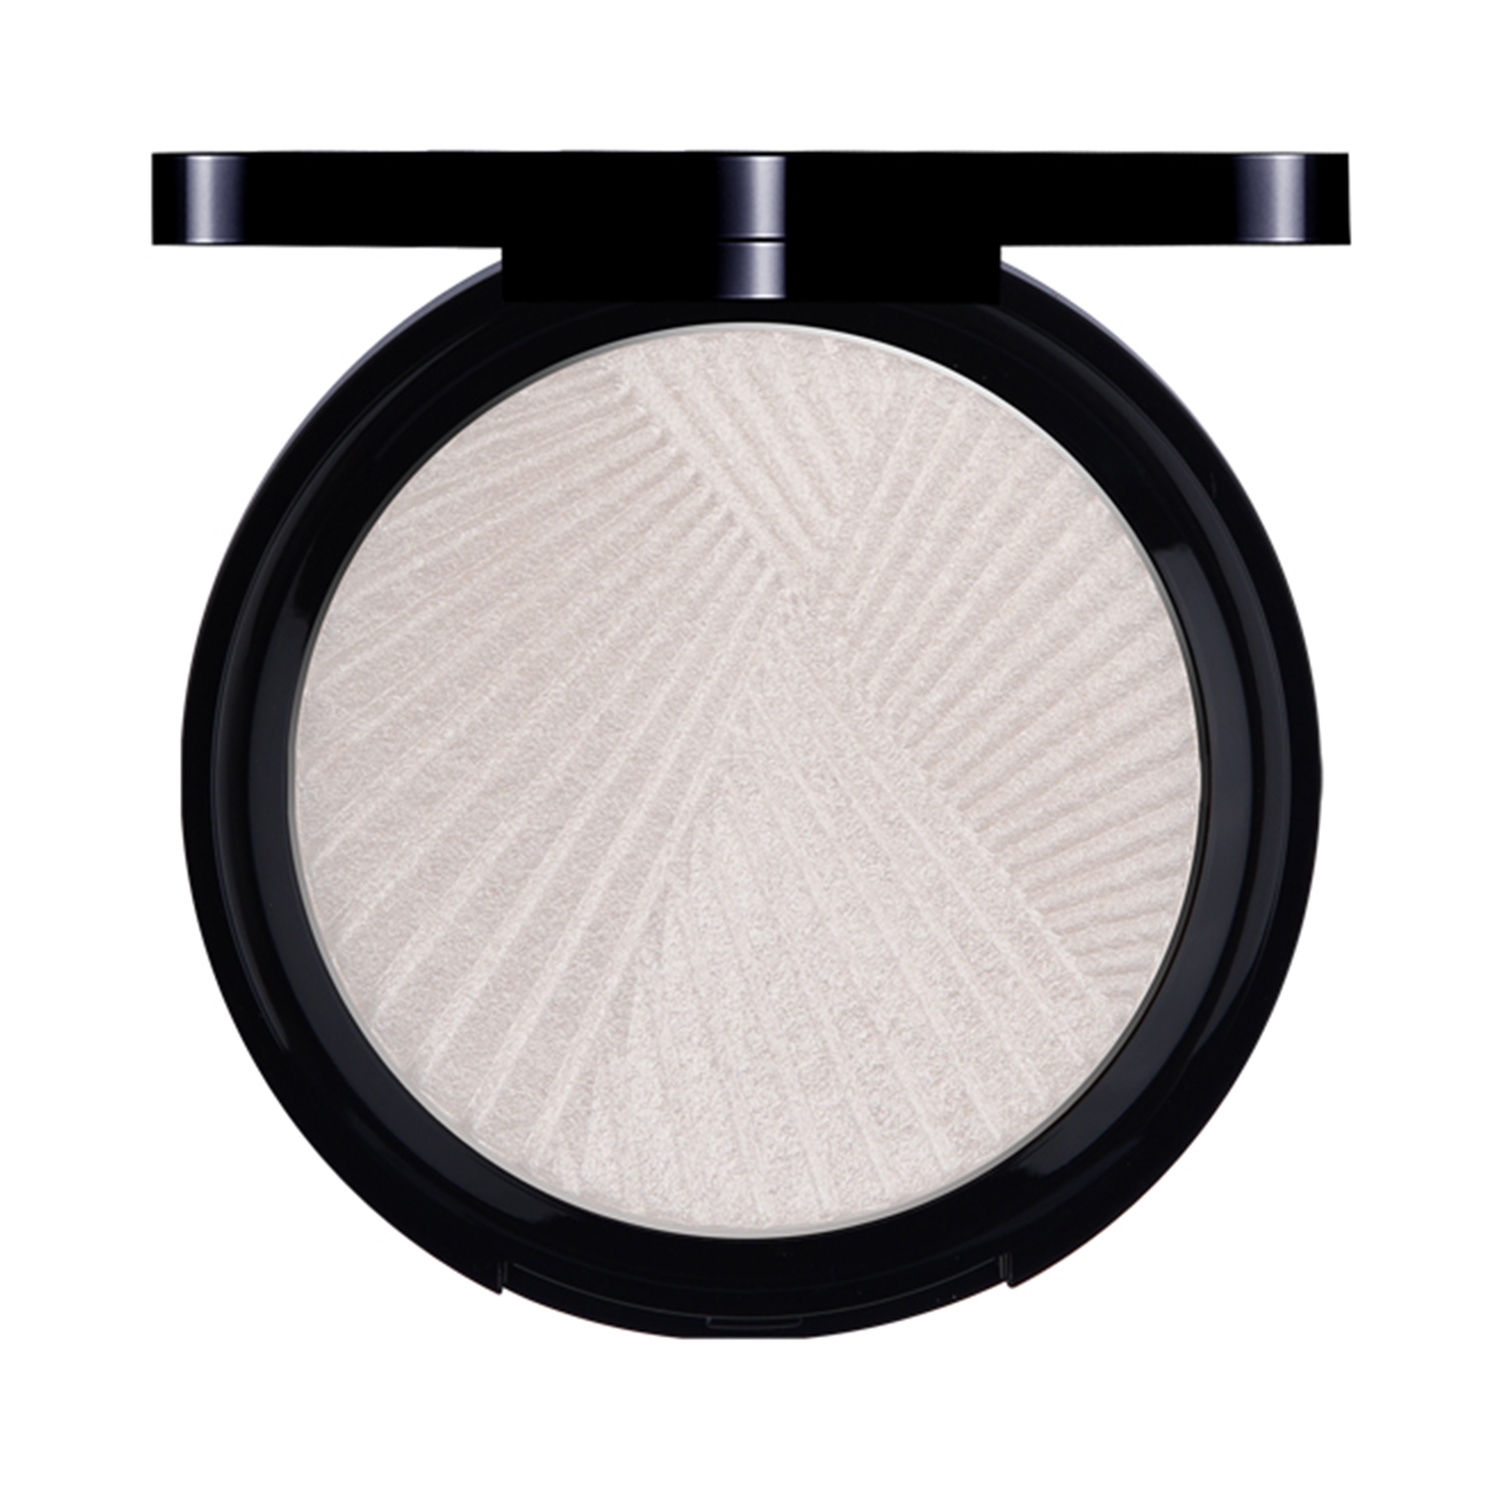 Daily Life Forever52 | Daily Life Forever52 Sunkissed Illuminator/ Highlighter ILU001 (8gm)